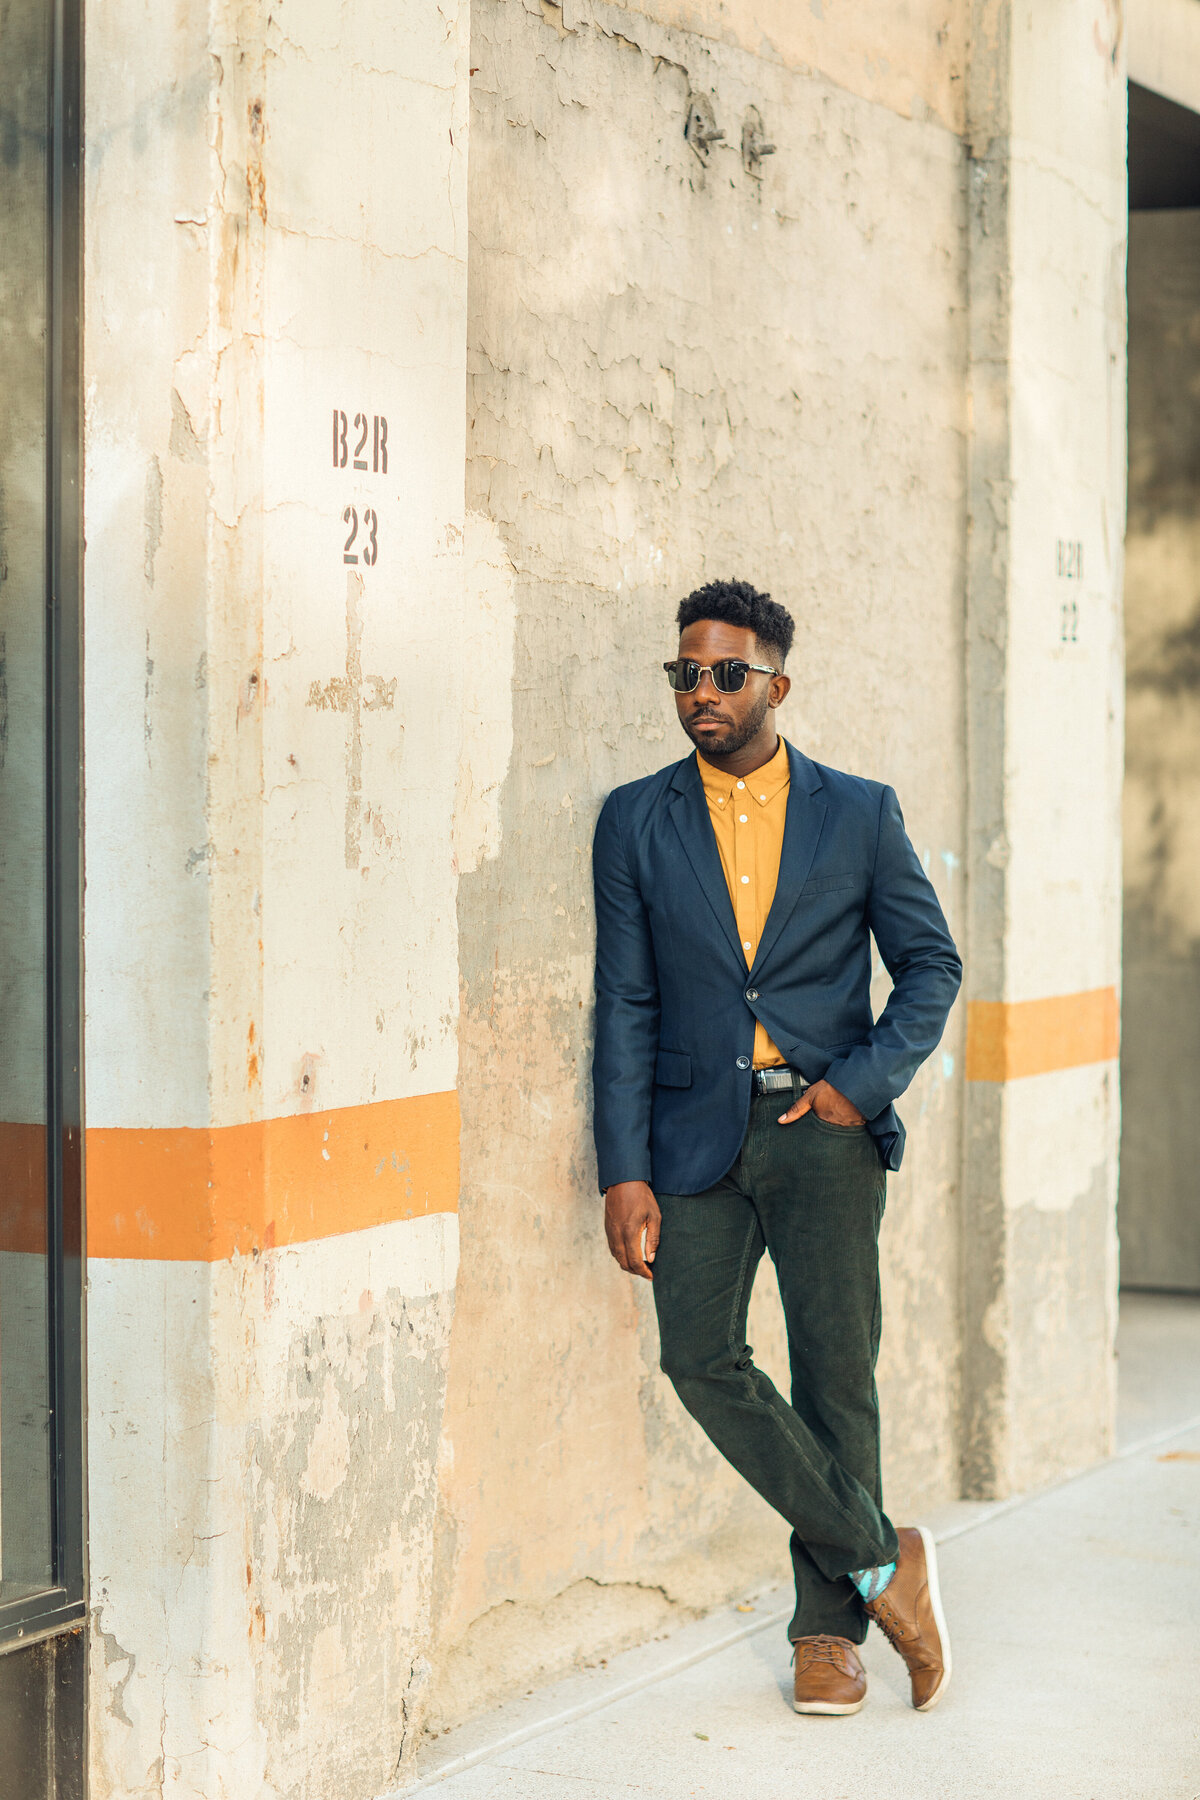 Portrait Photo Of Young Black Man Leaning Against a Wall With One Hand In His Pocket Los Angeles